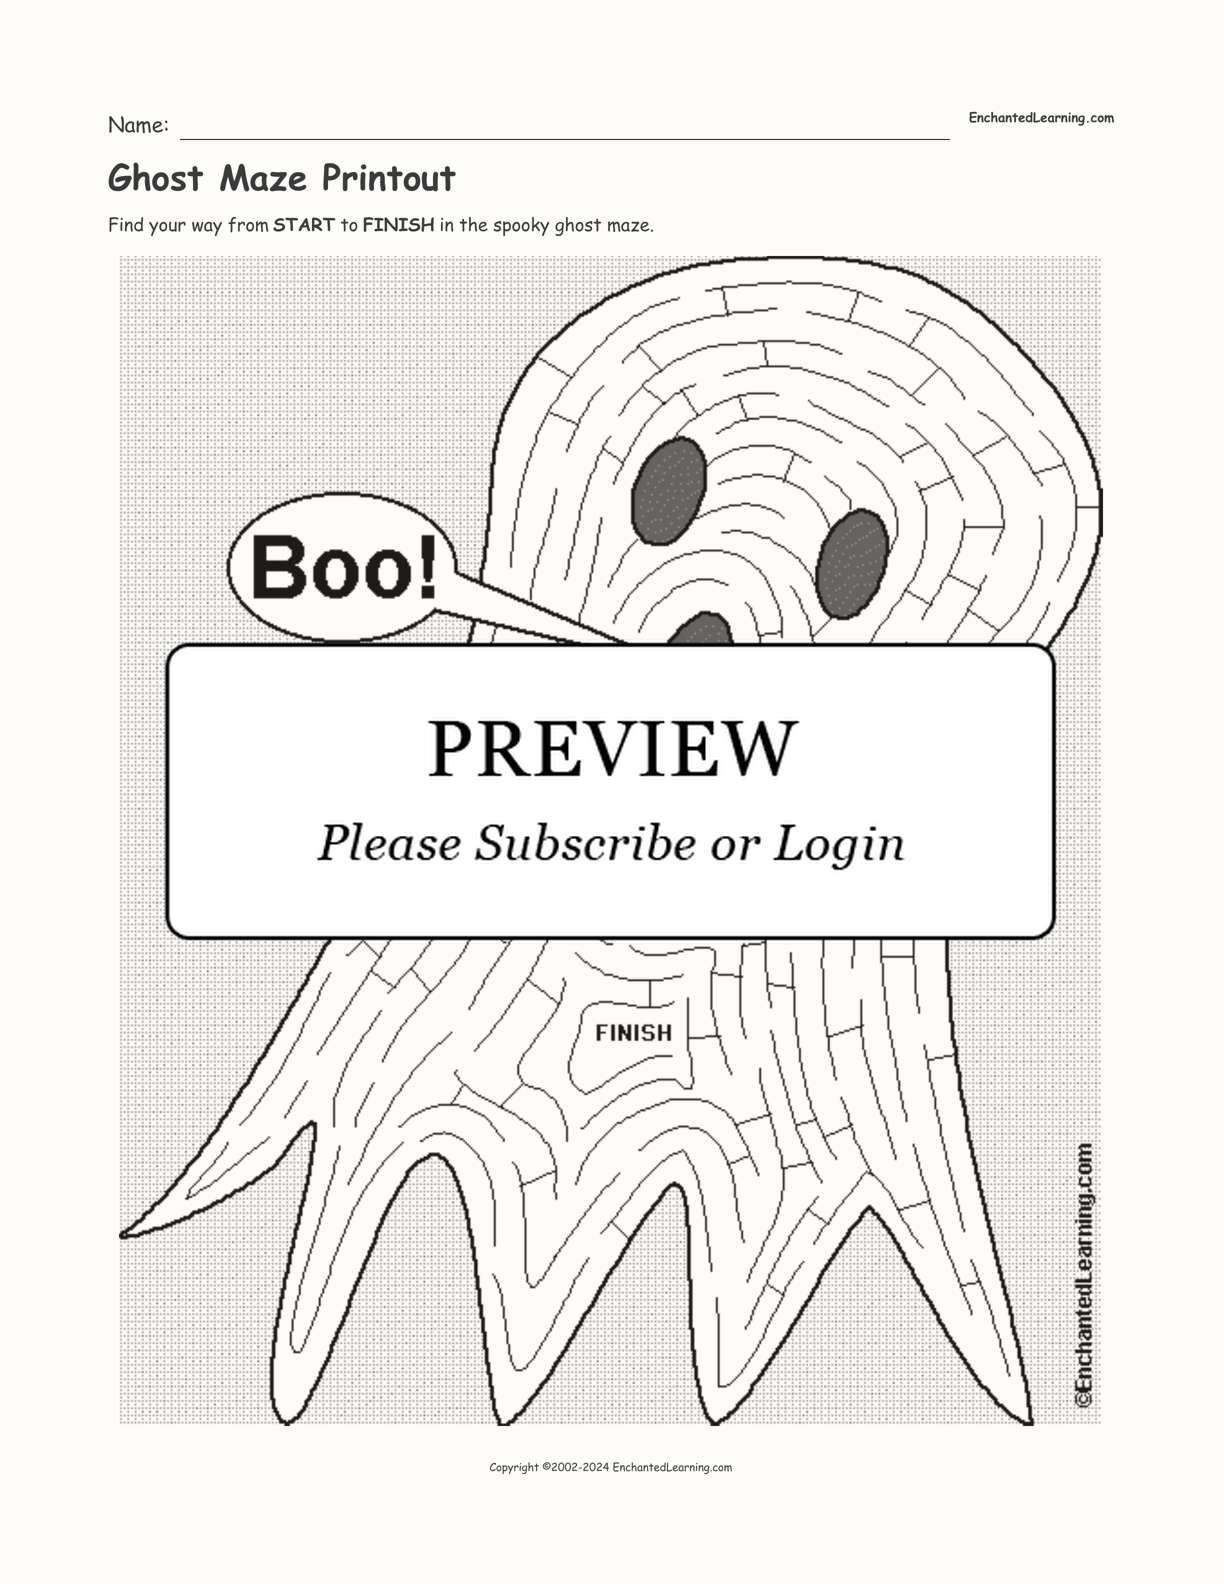 Ghost Maze Printout interactive worksheet page 1